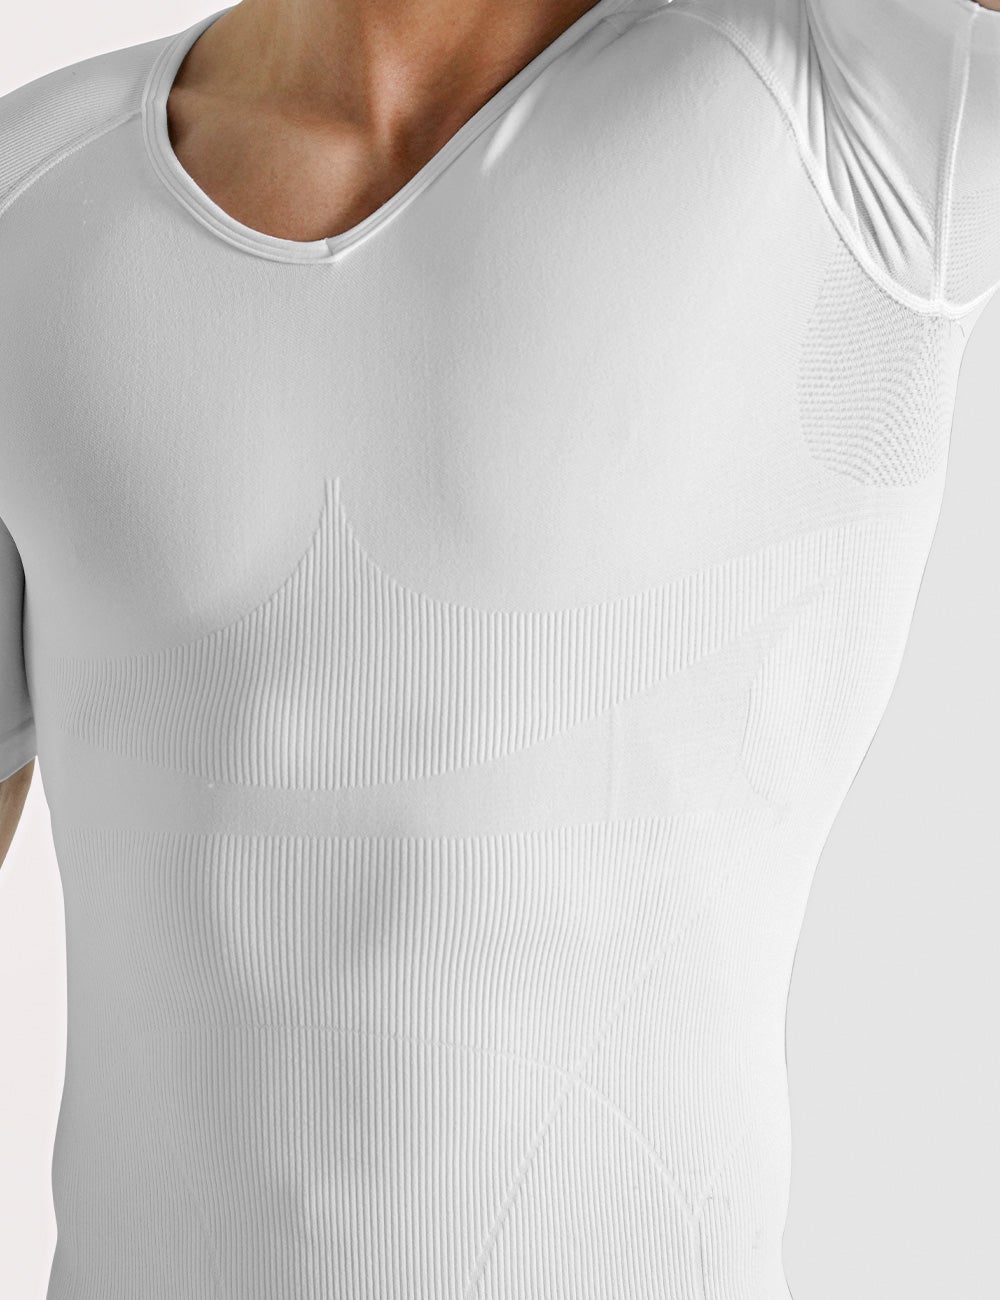  TiTARR Strong Men Body Shaper Compression Shirt to